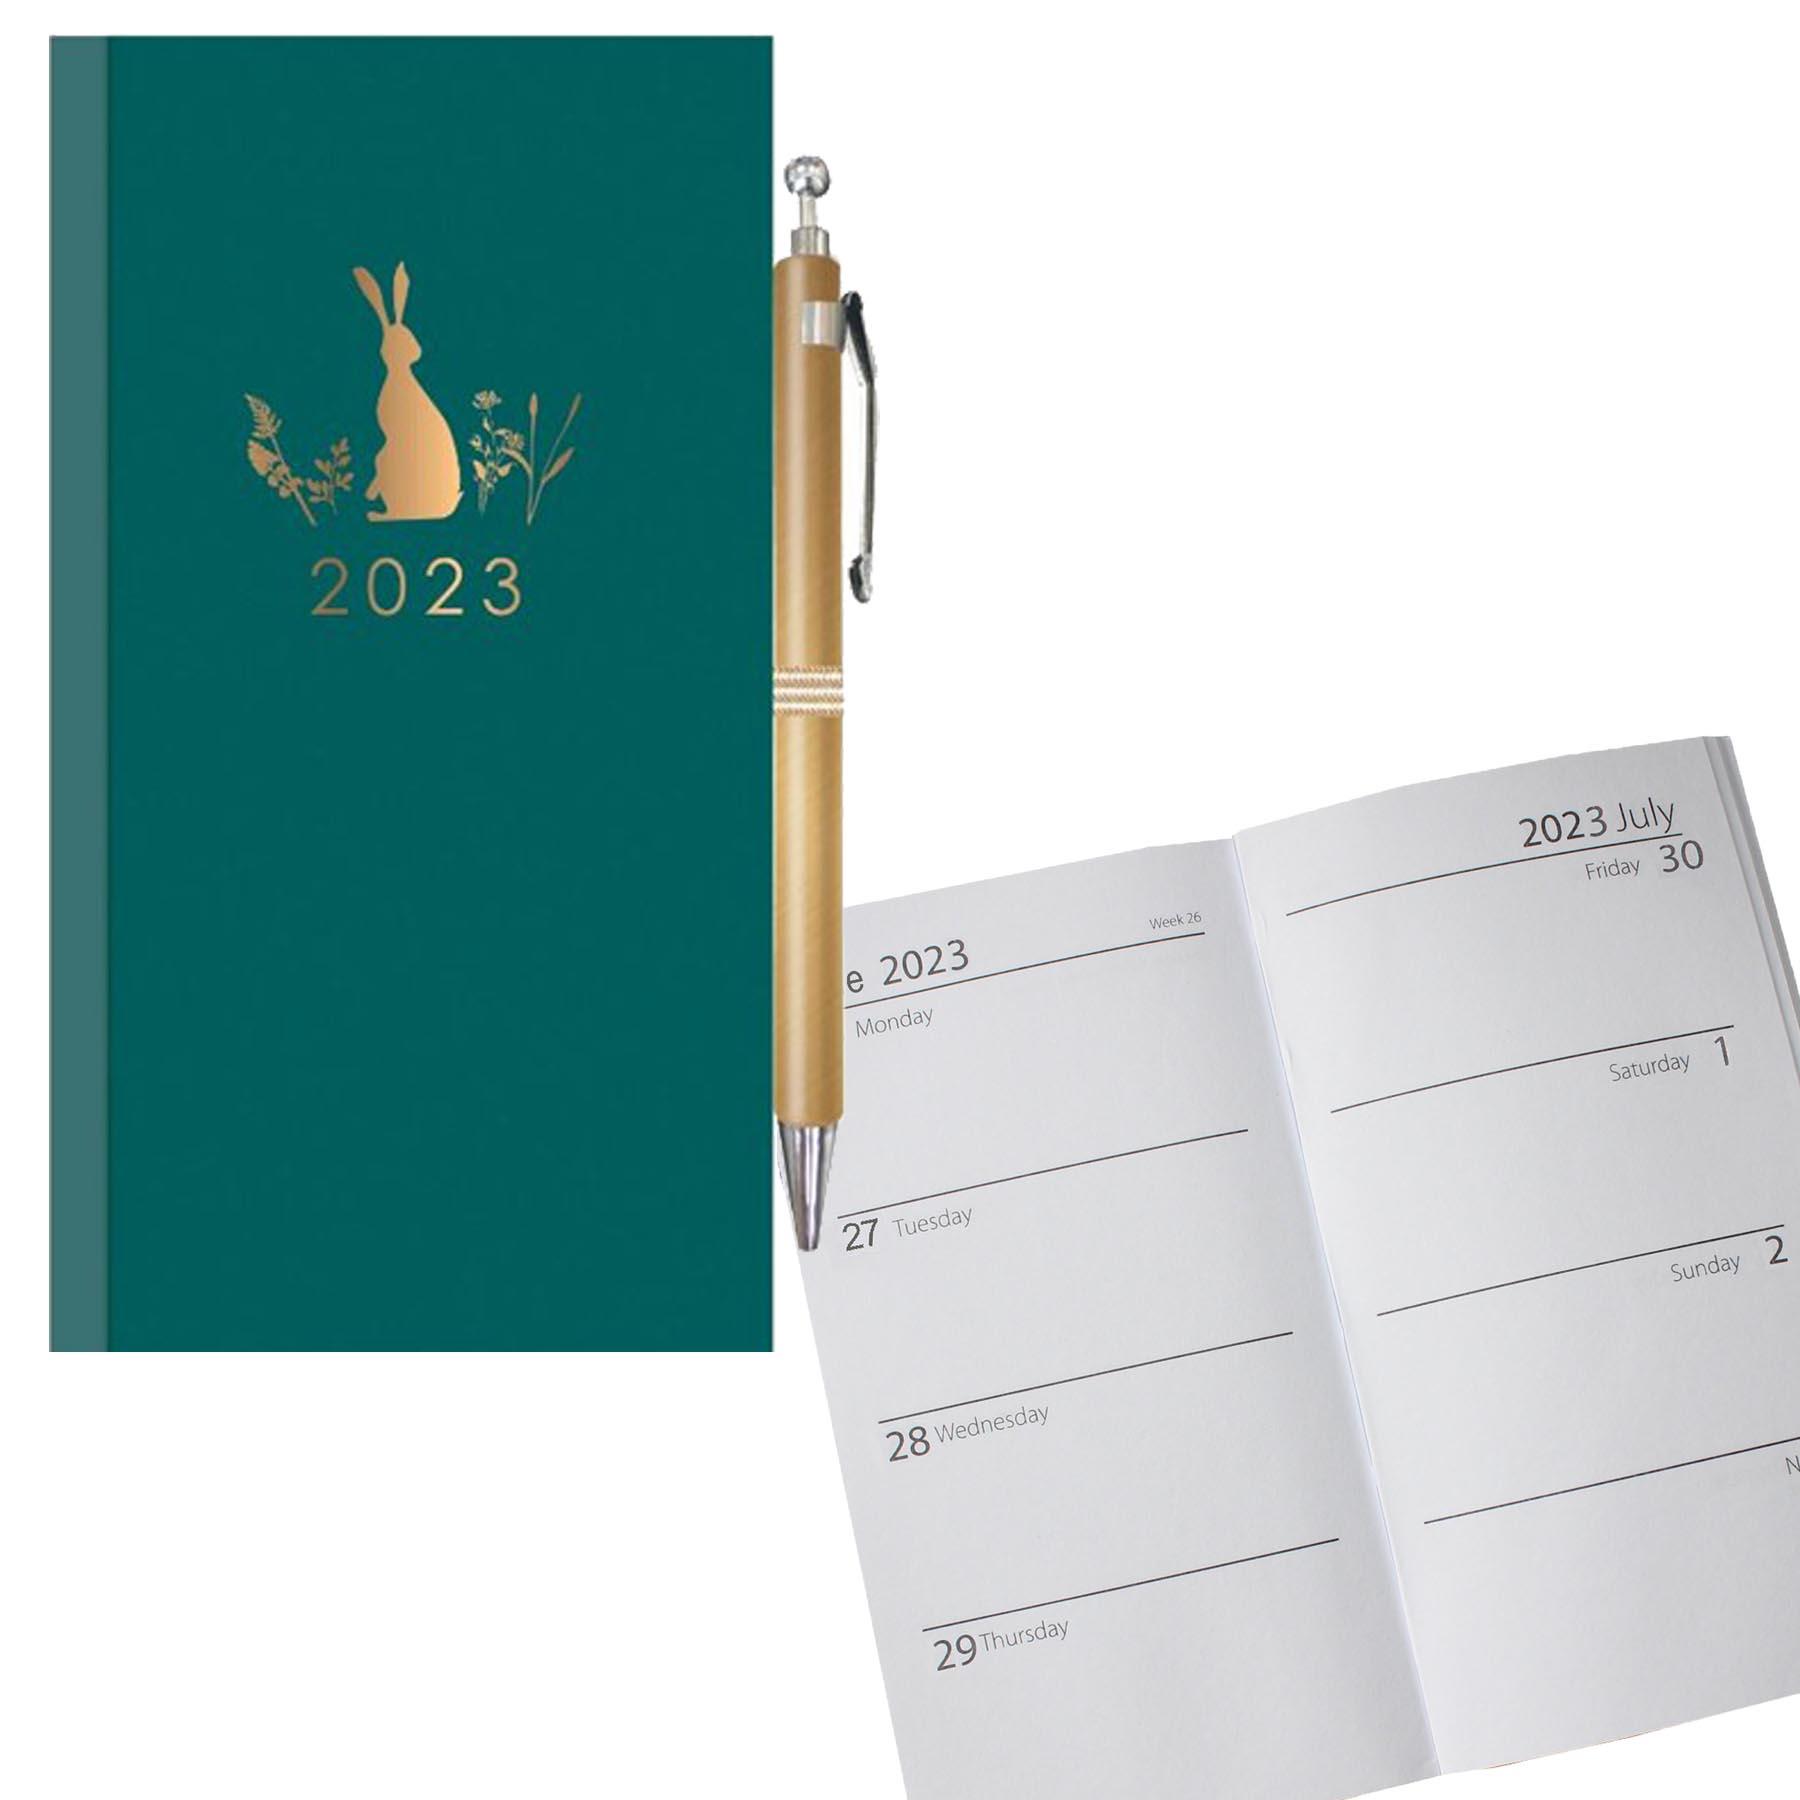 2023 Slimline Week To View Diary and Pen 0819 - Foil Print Green